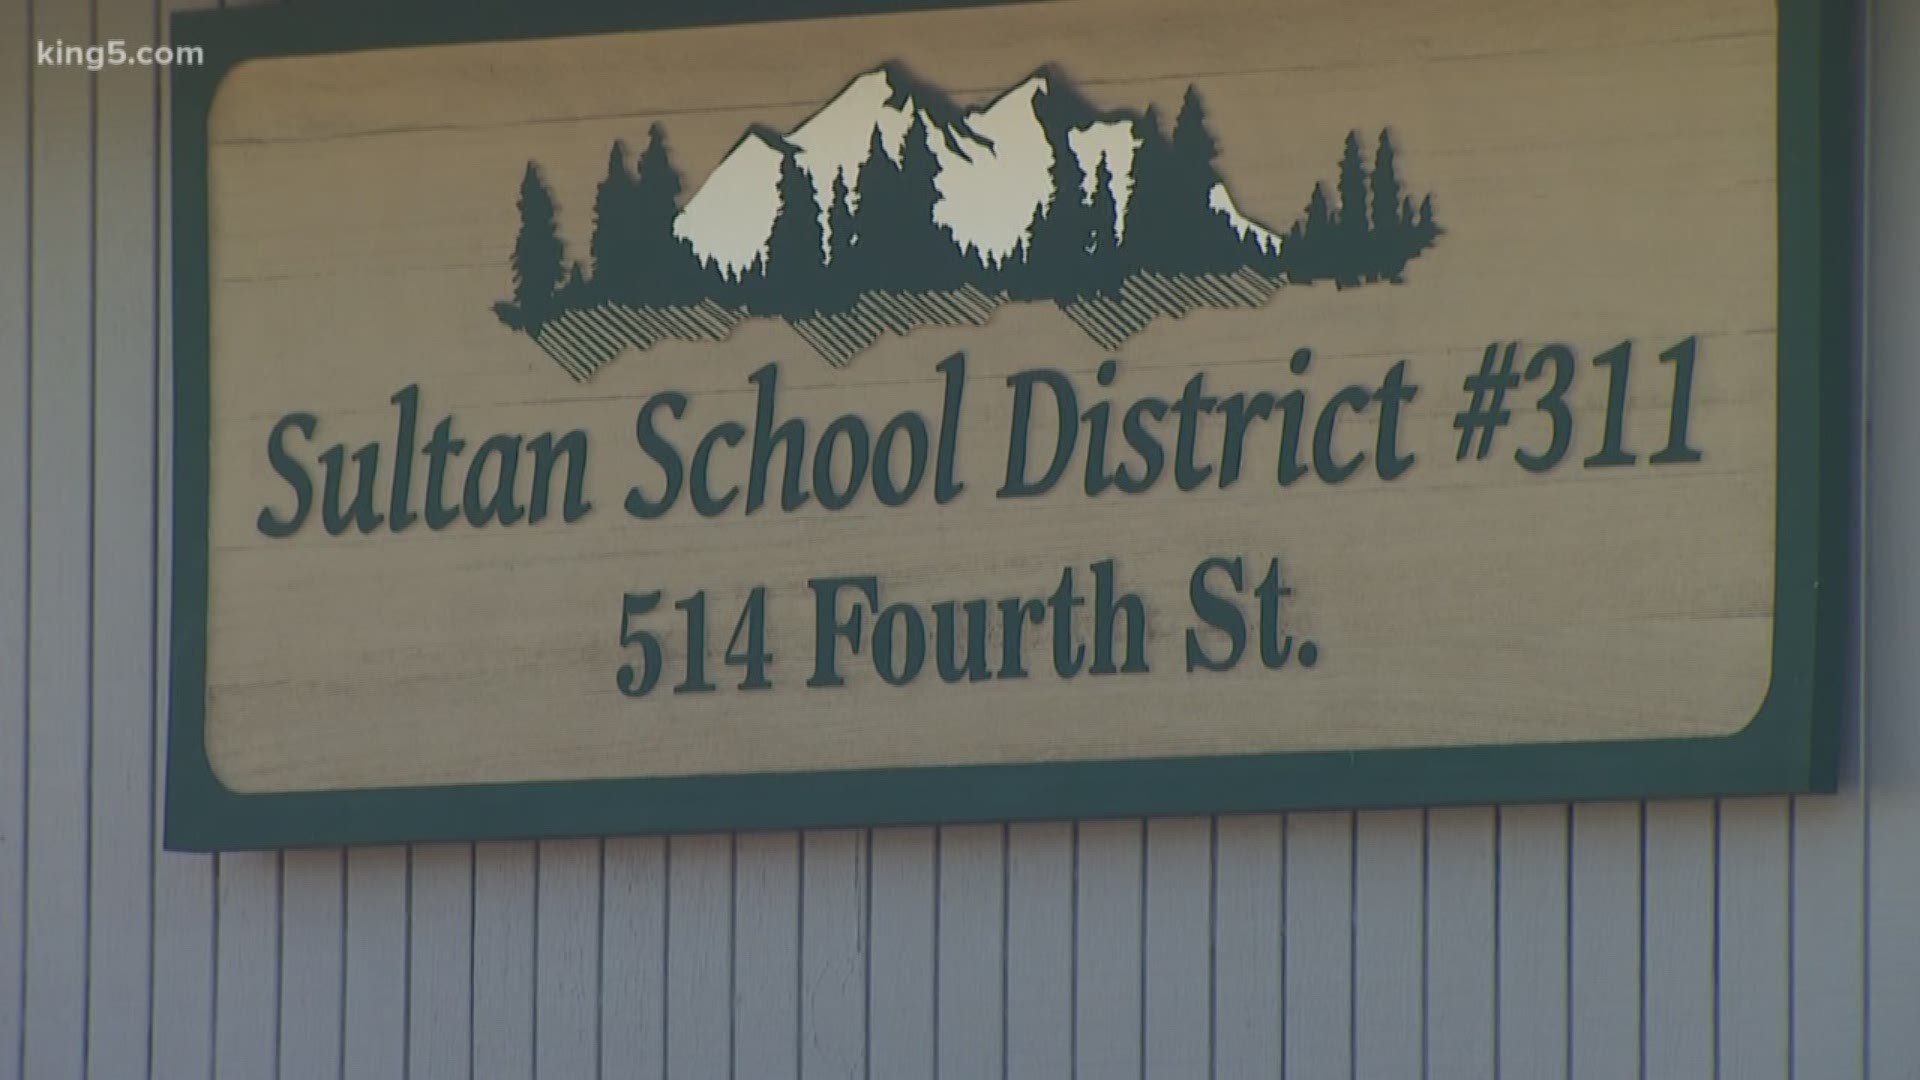 A trusted Sultan School District volunteer and state corrections officer was arrested on child rape charges. The child was just 13 years old at the time, police said